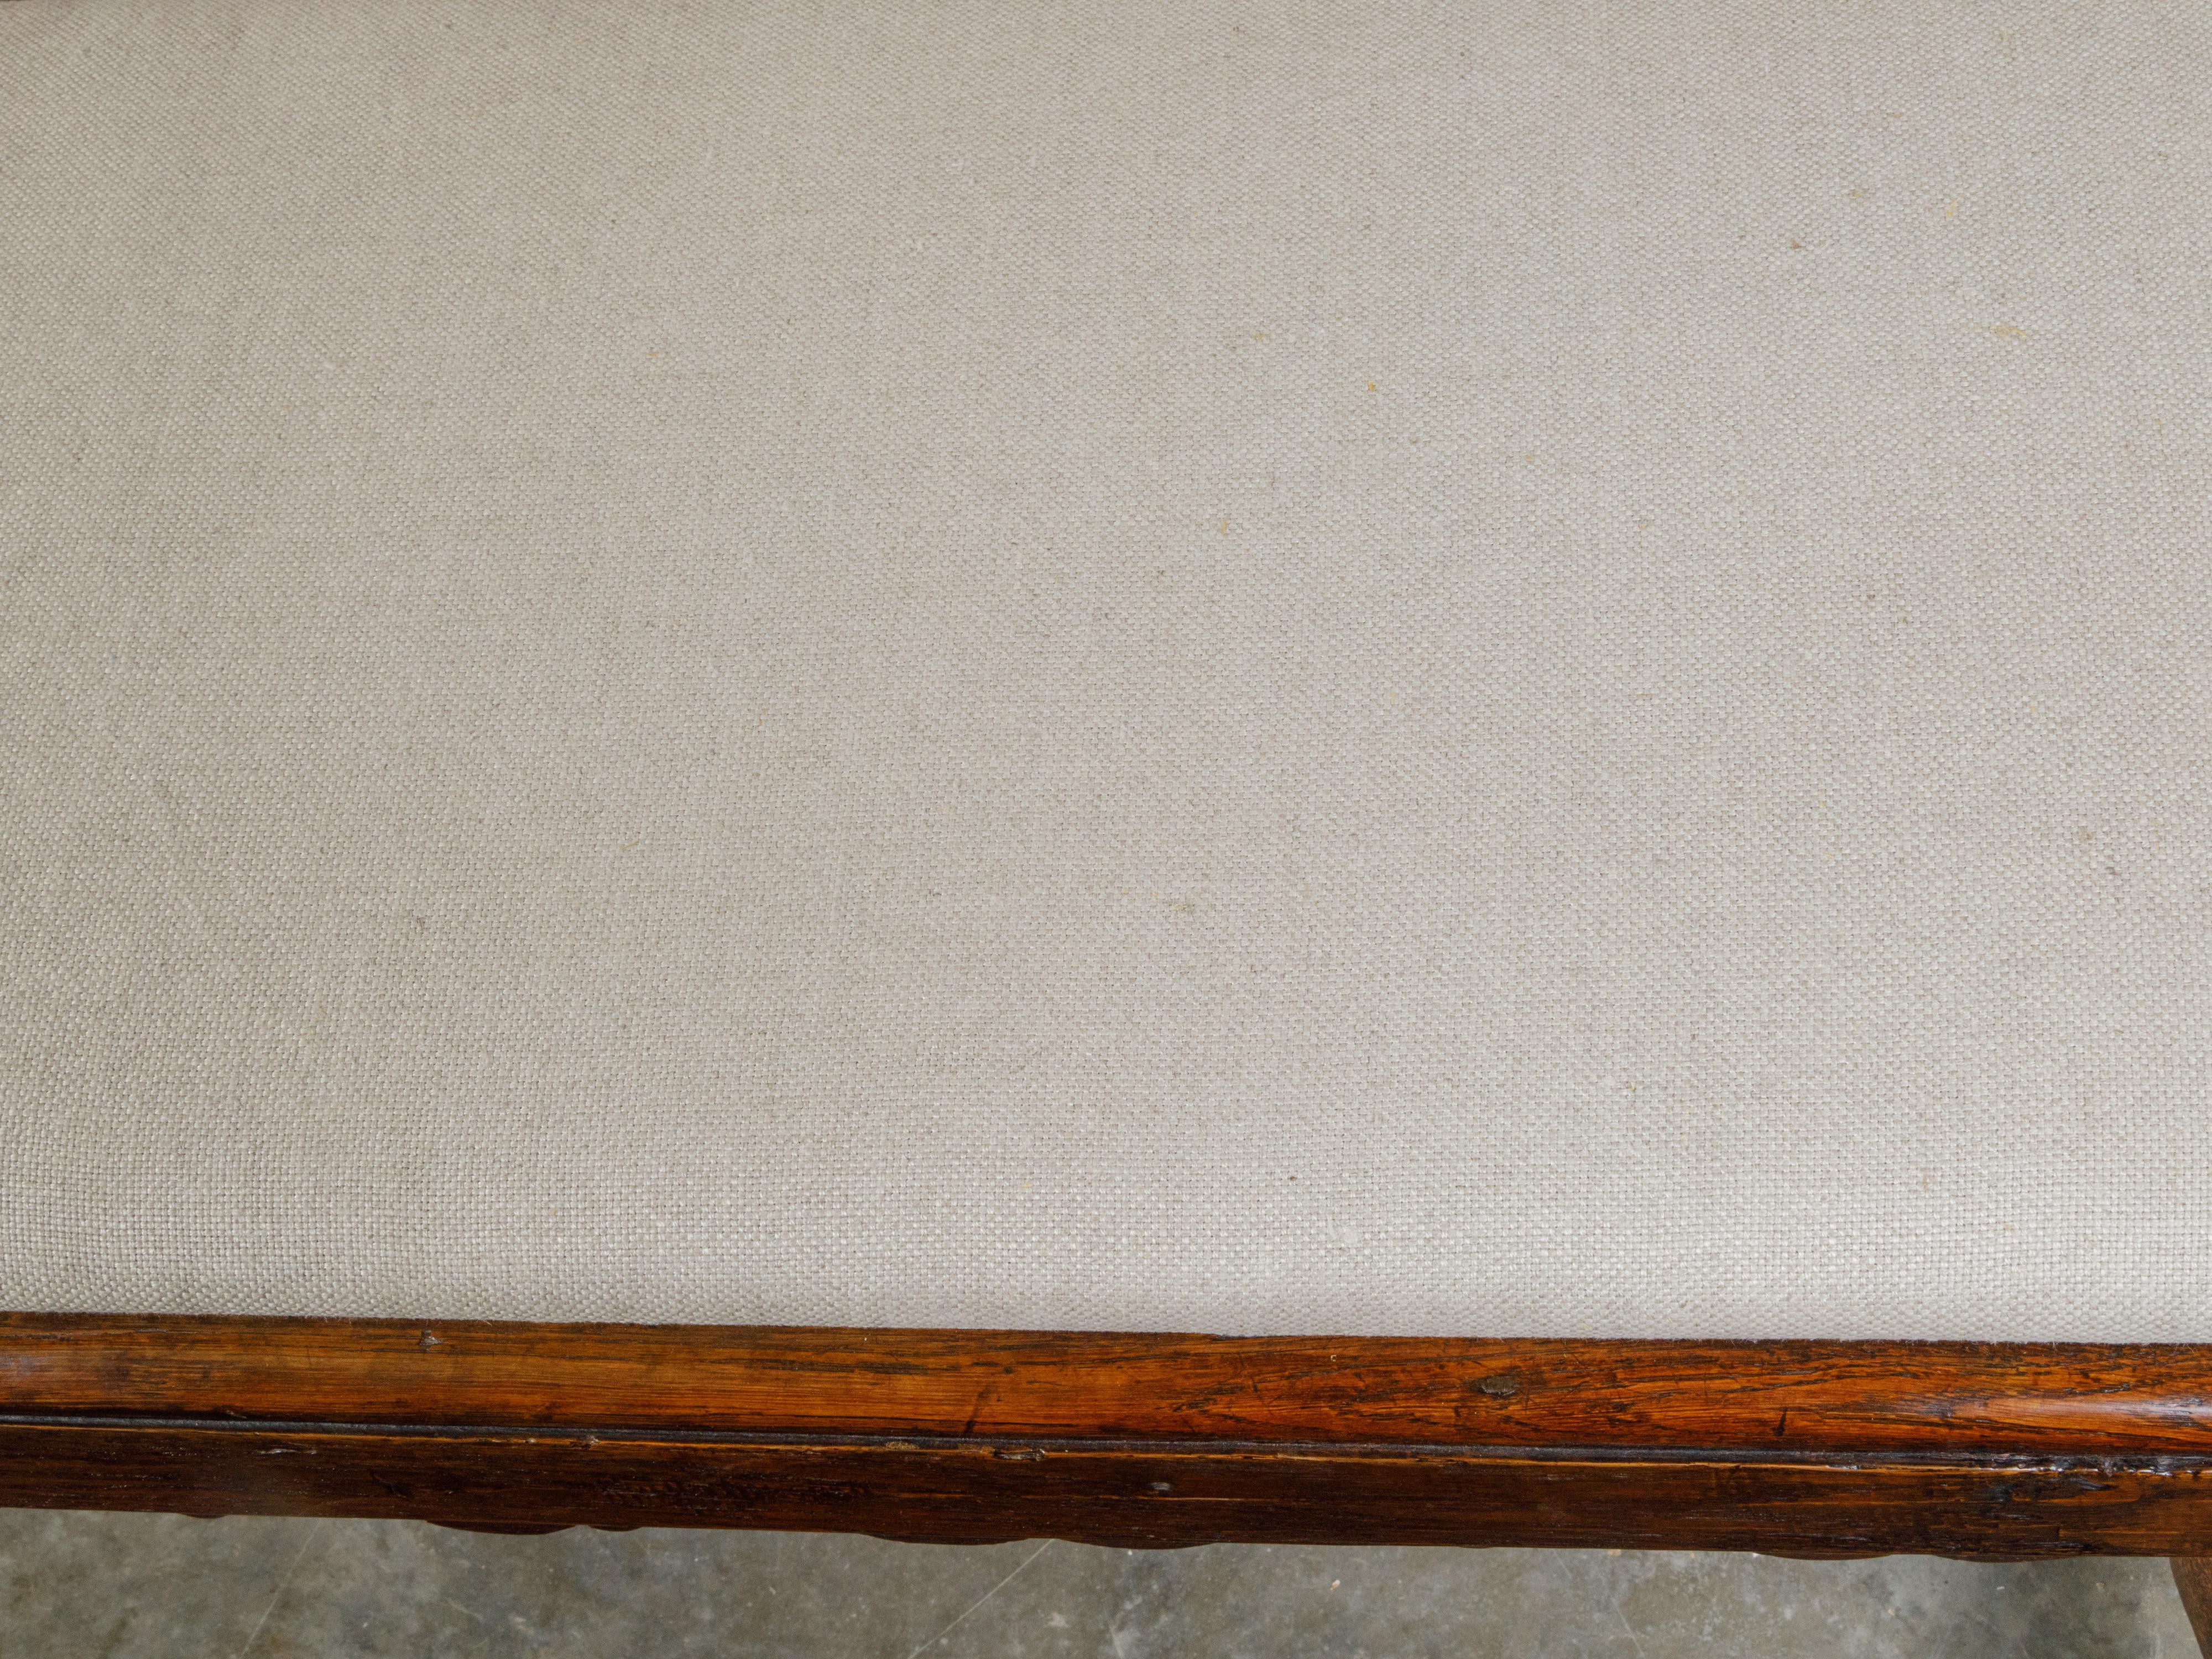 Carved English 1840s Oak Bench with Turned Legs, H-Form Stretcher and Upholstery